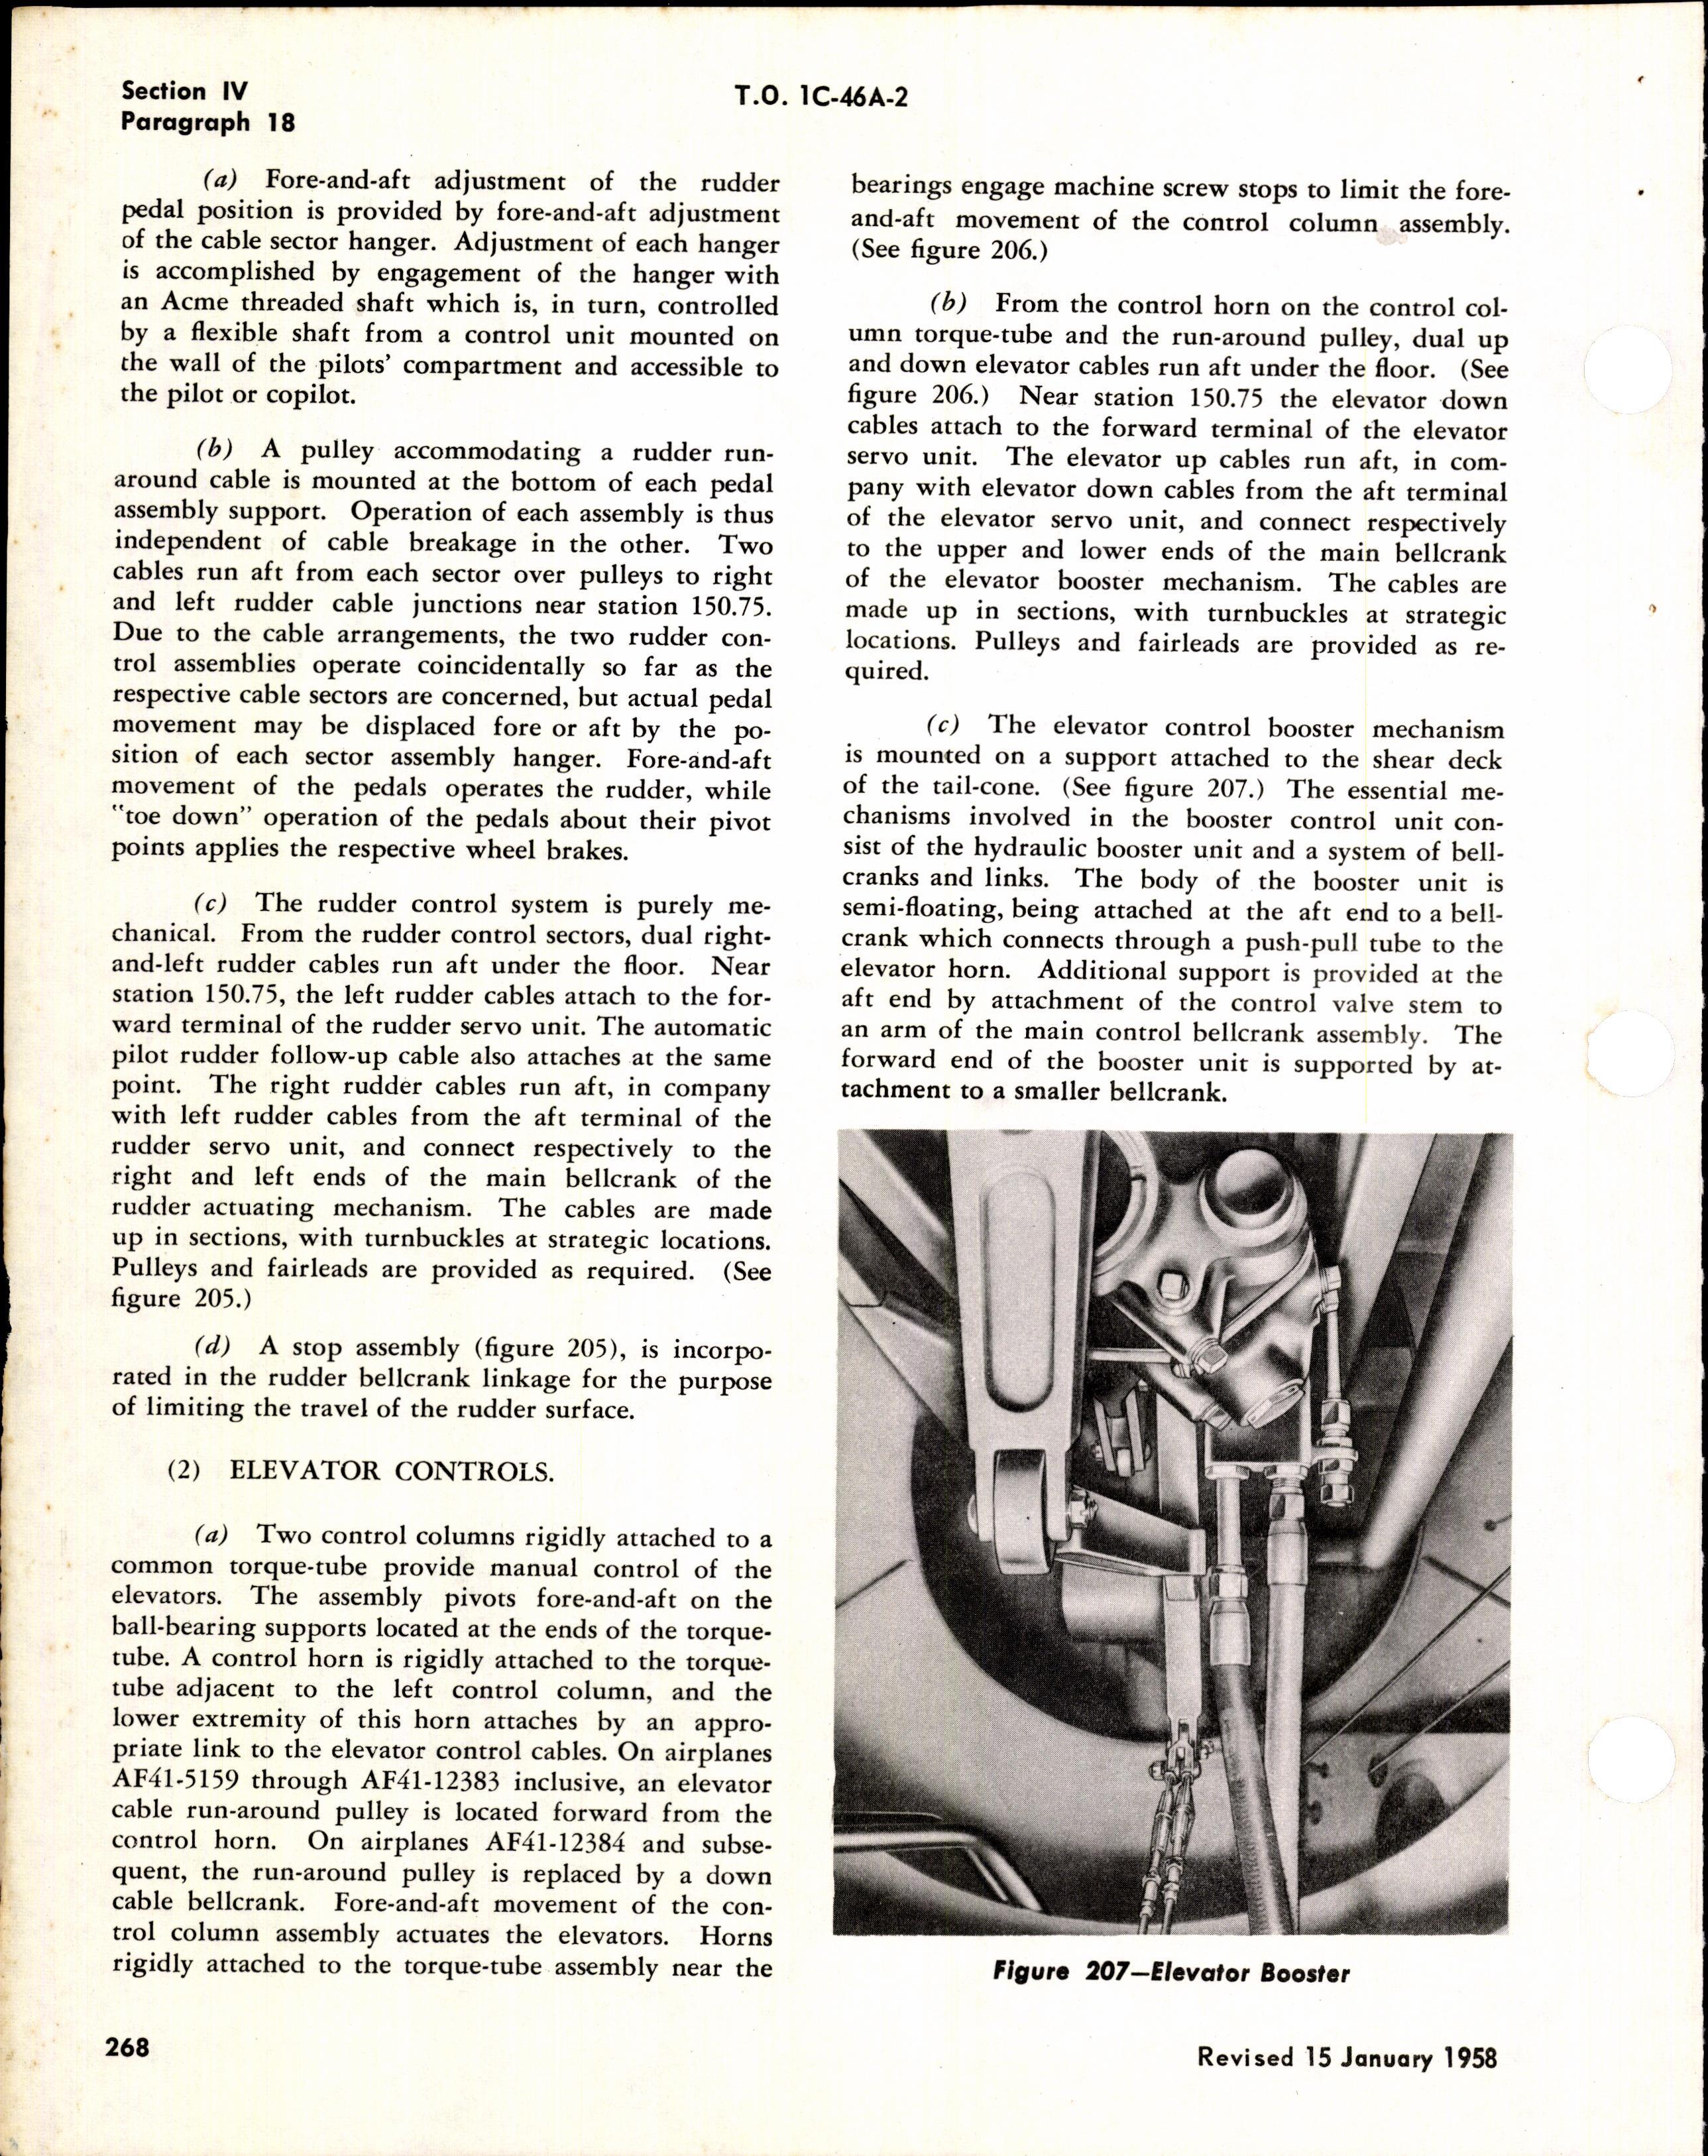 Sample page 8 from AirCorps Library document: Maintenance Instructions for C-46, ZC-46A, C-46D, C-46F & R5C-1